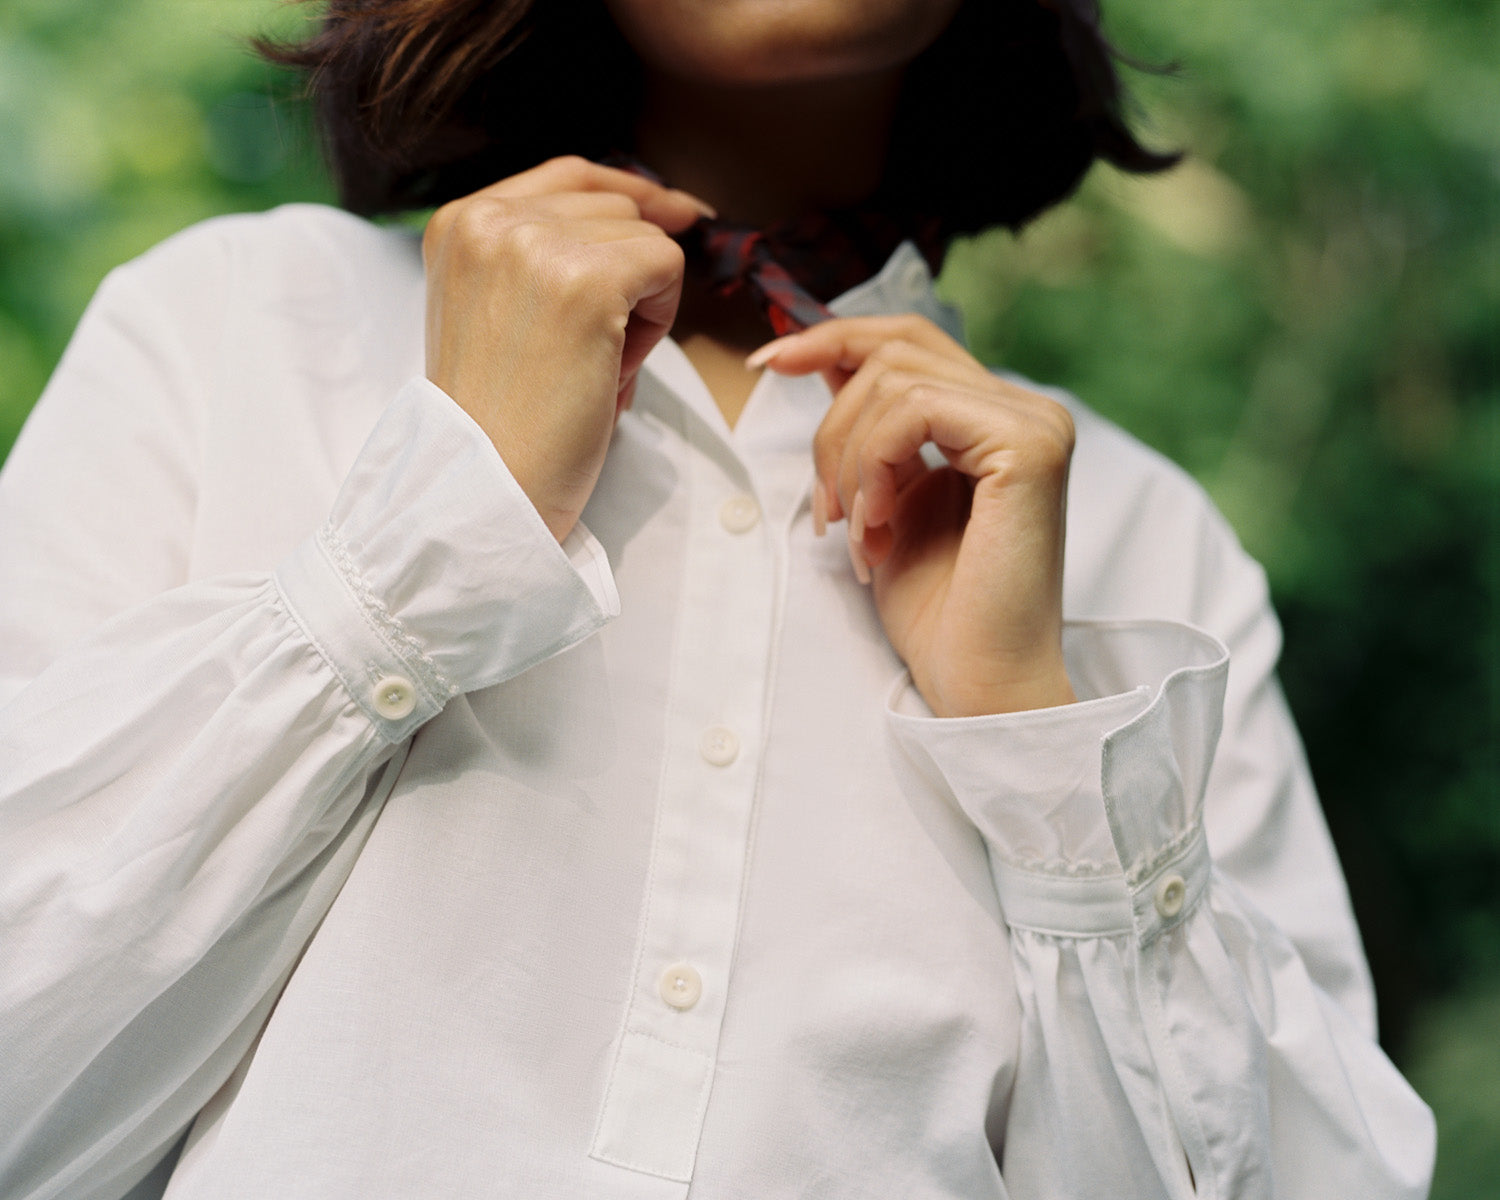 Recycled cotton white blouse - Saywood's Marie A-line blouse with gathered cuffs trimmed with lace. Model touches a red check neckerchief worn around her neck.